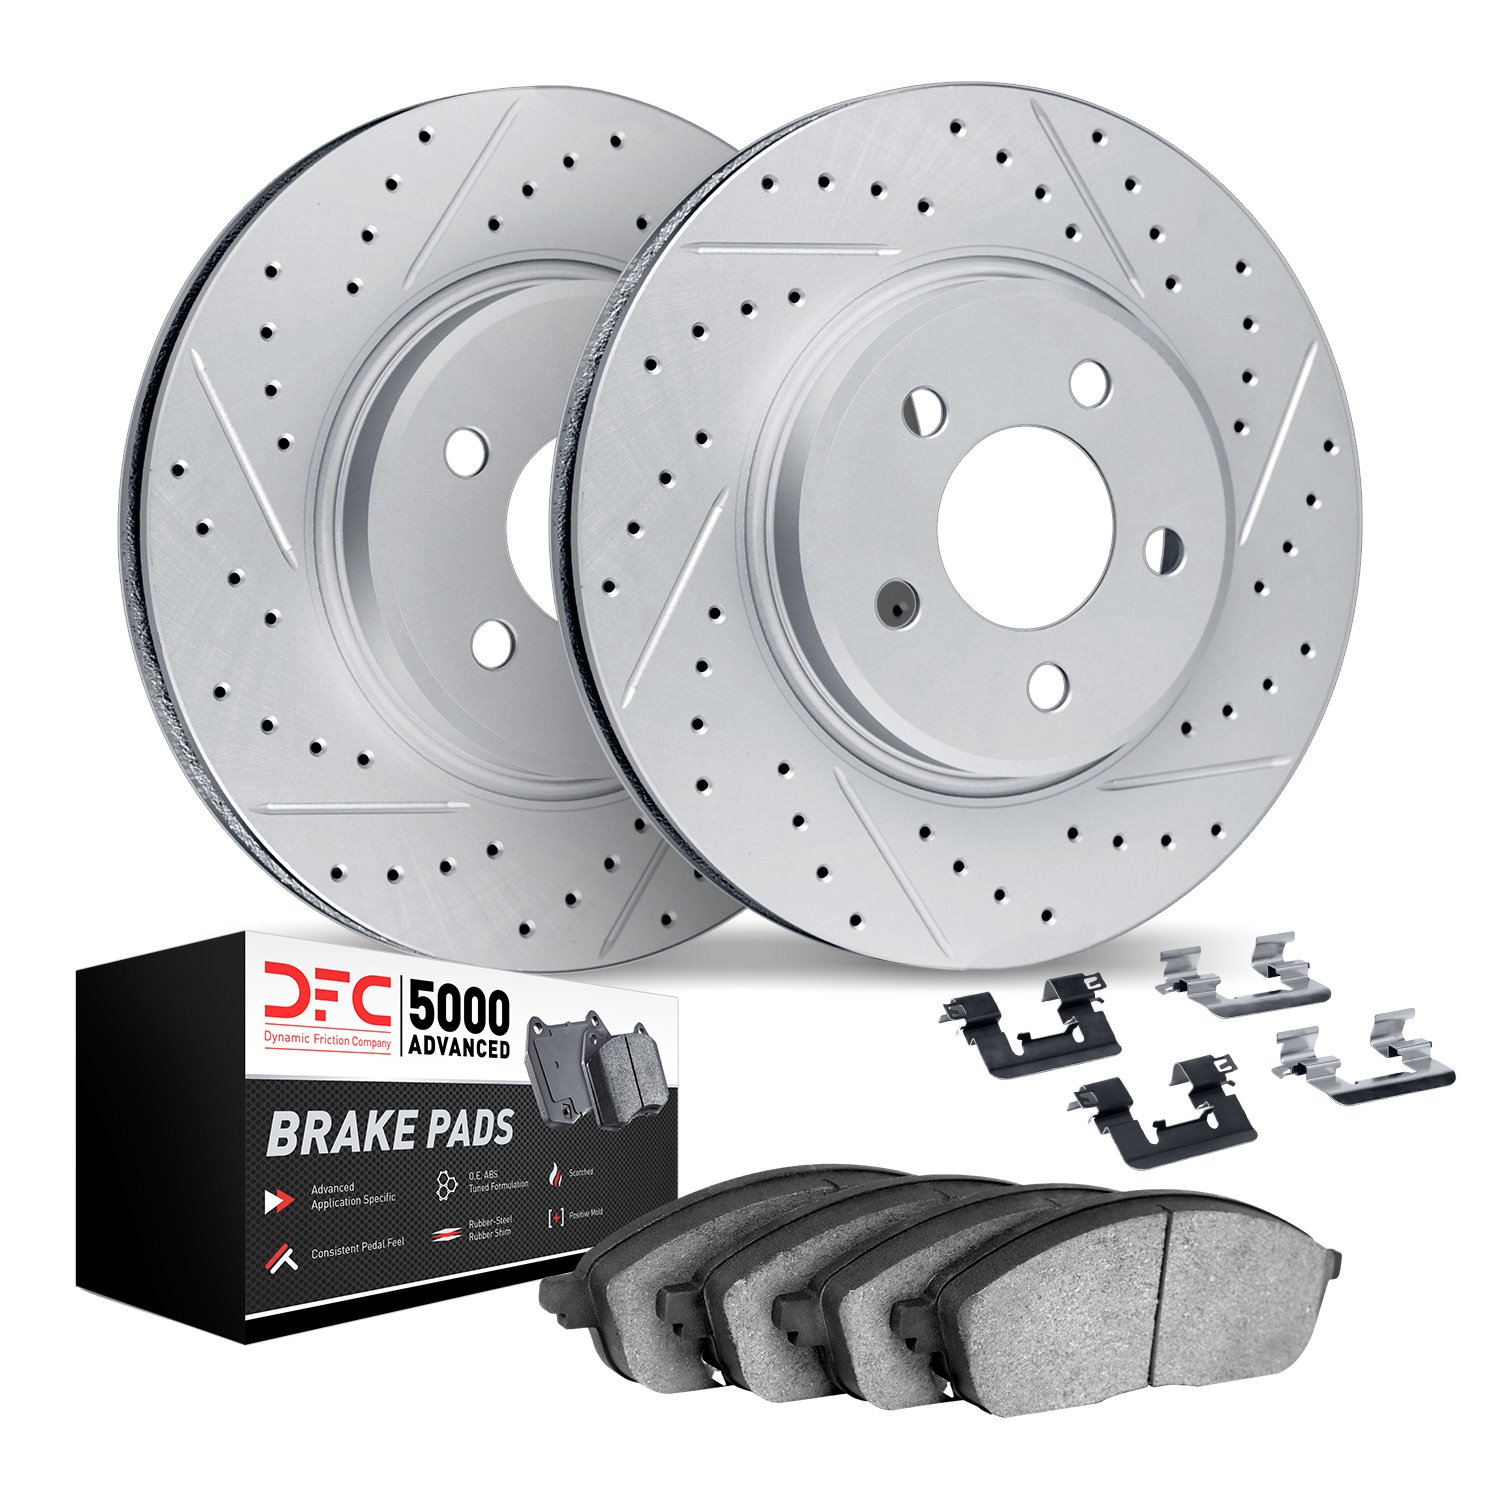 2512-31033 Geoperformance Drilled/Slotted Rotors w/5000 Advanced Brake Pads Kit & Hardware, 2002-2005 BMW, Position: Rear